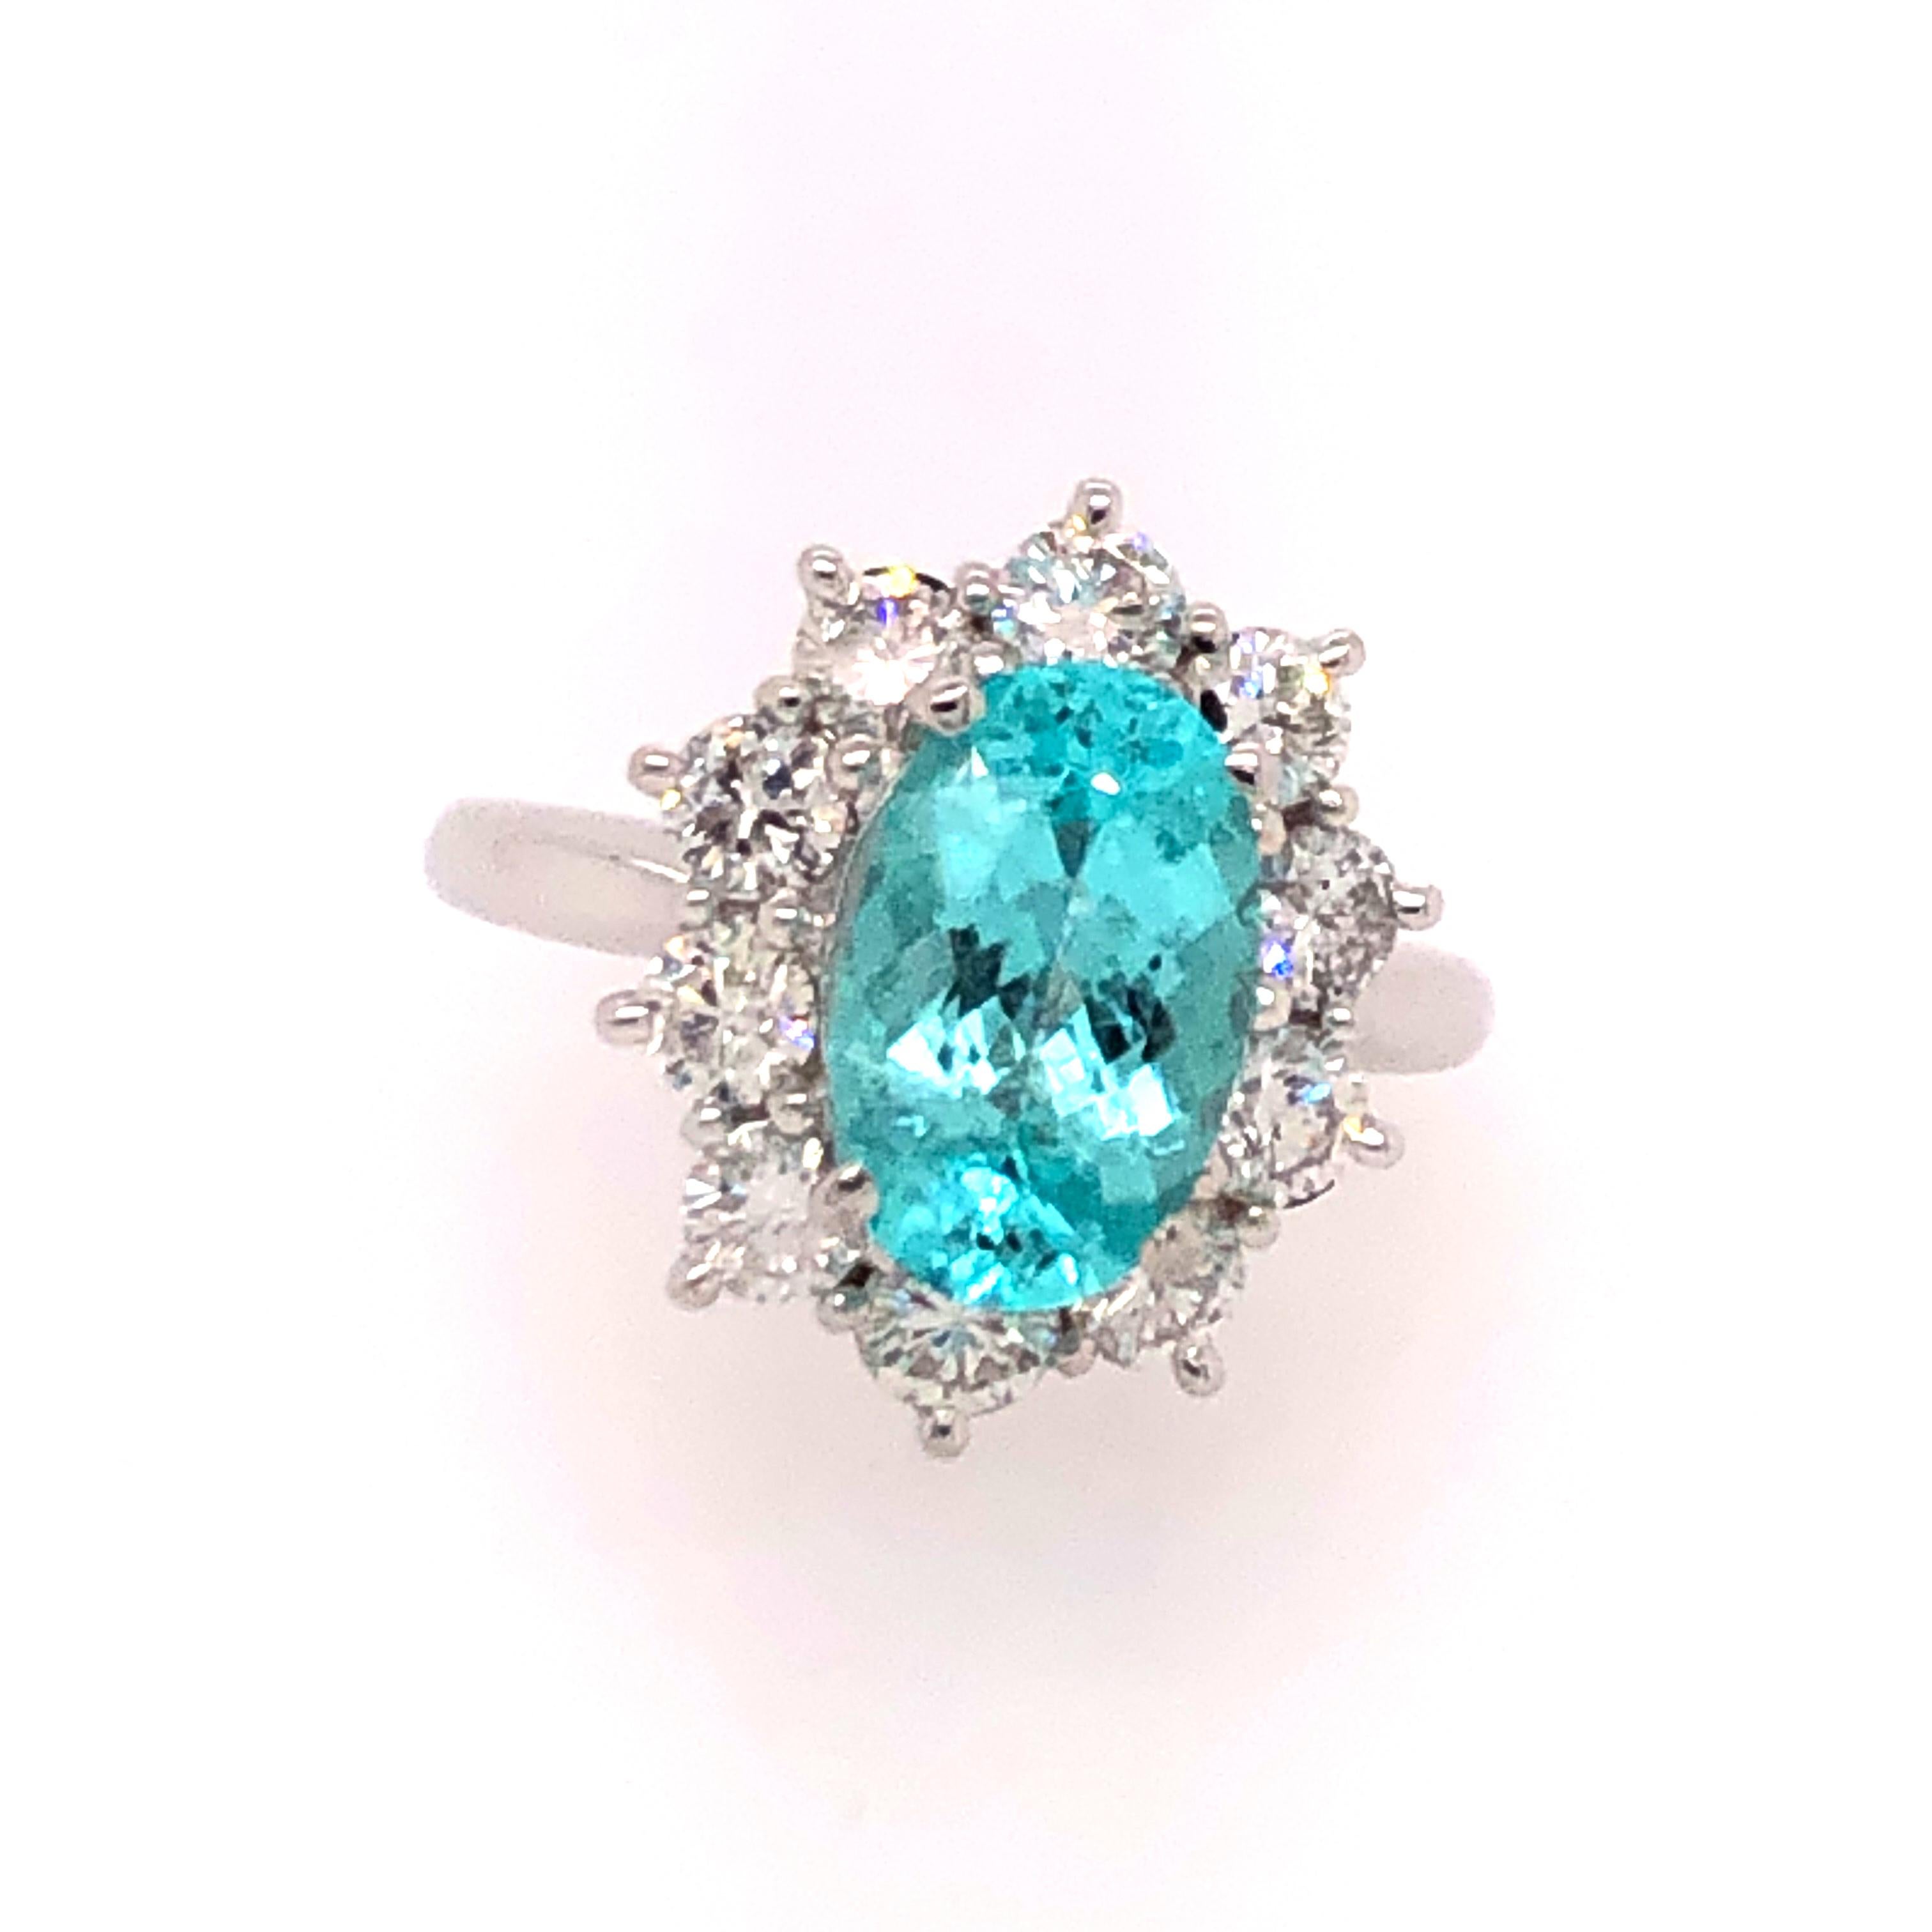 There are rings and then there are rings. . . that you don't want to take off!
Extremely rare and highly sought after, Paraiba tourmaline is for the most serious collector. This exceptionally bright and beautiful 3.07 CT oval Paraiba is set in a